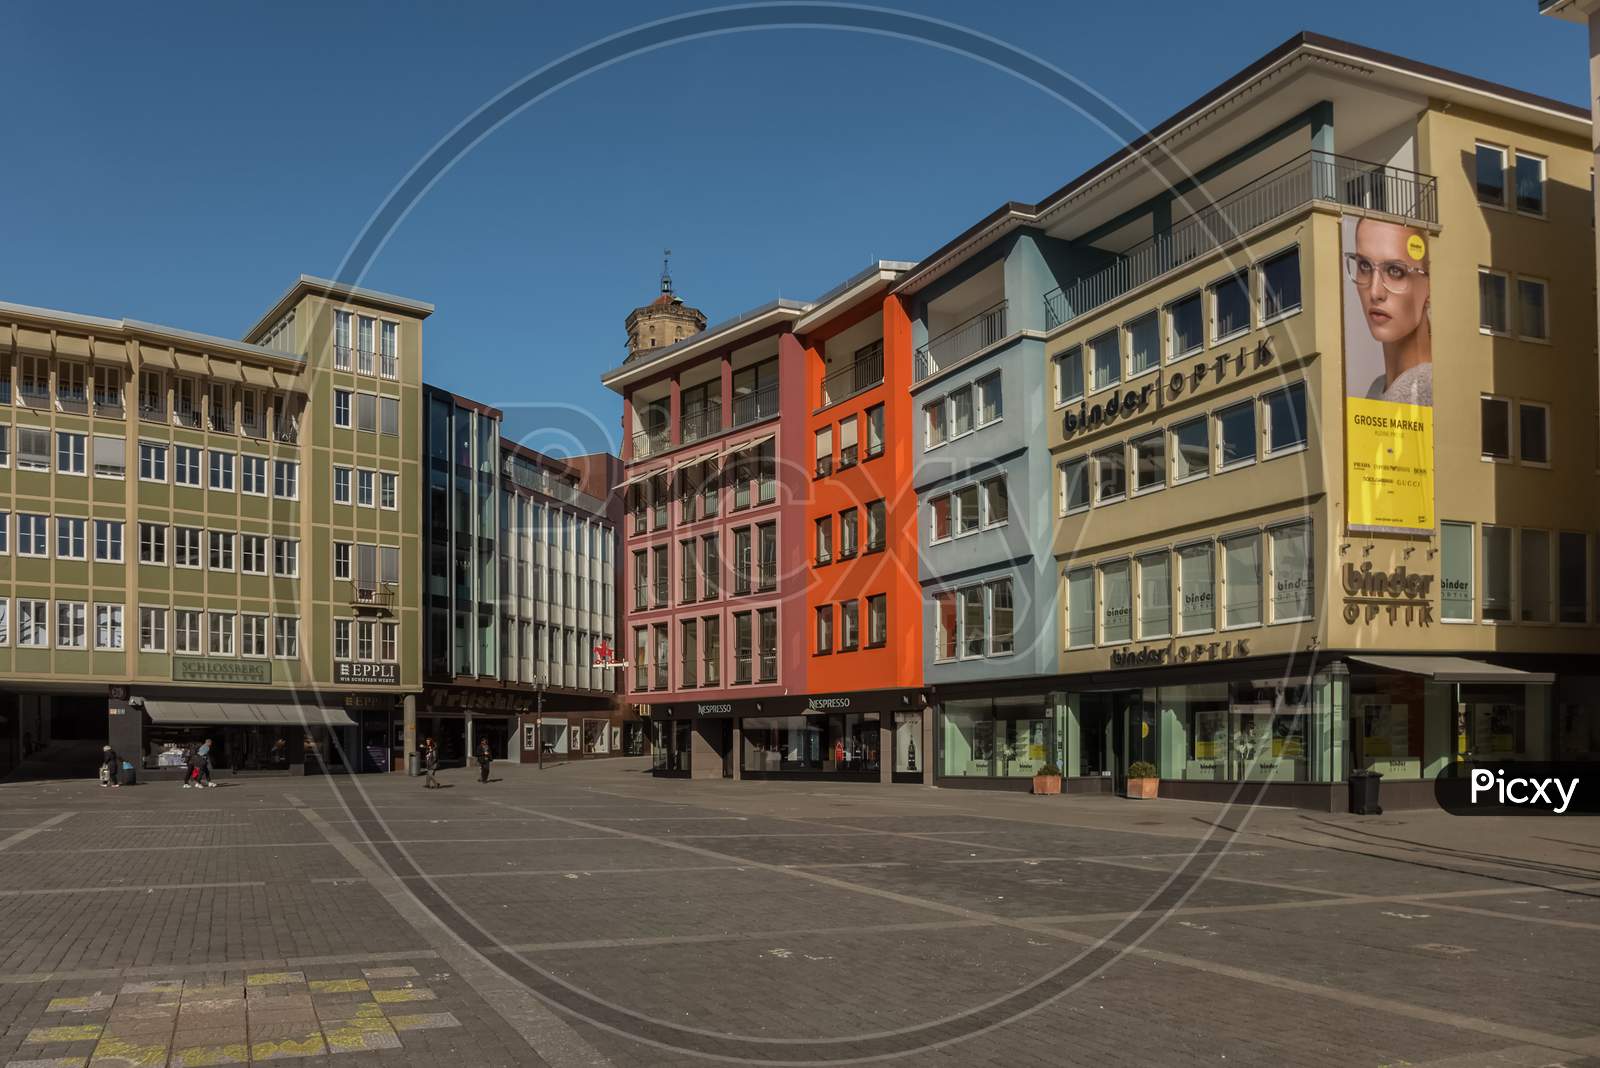 Stuttgart,Germany - February 24,2019:Rathausplatz This Place In The Center Of The City And There Are Many Shops In Old Buildings Around.